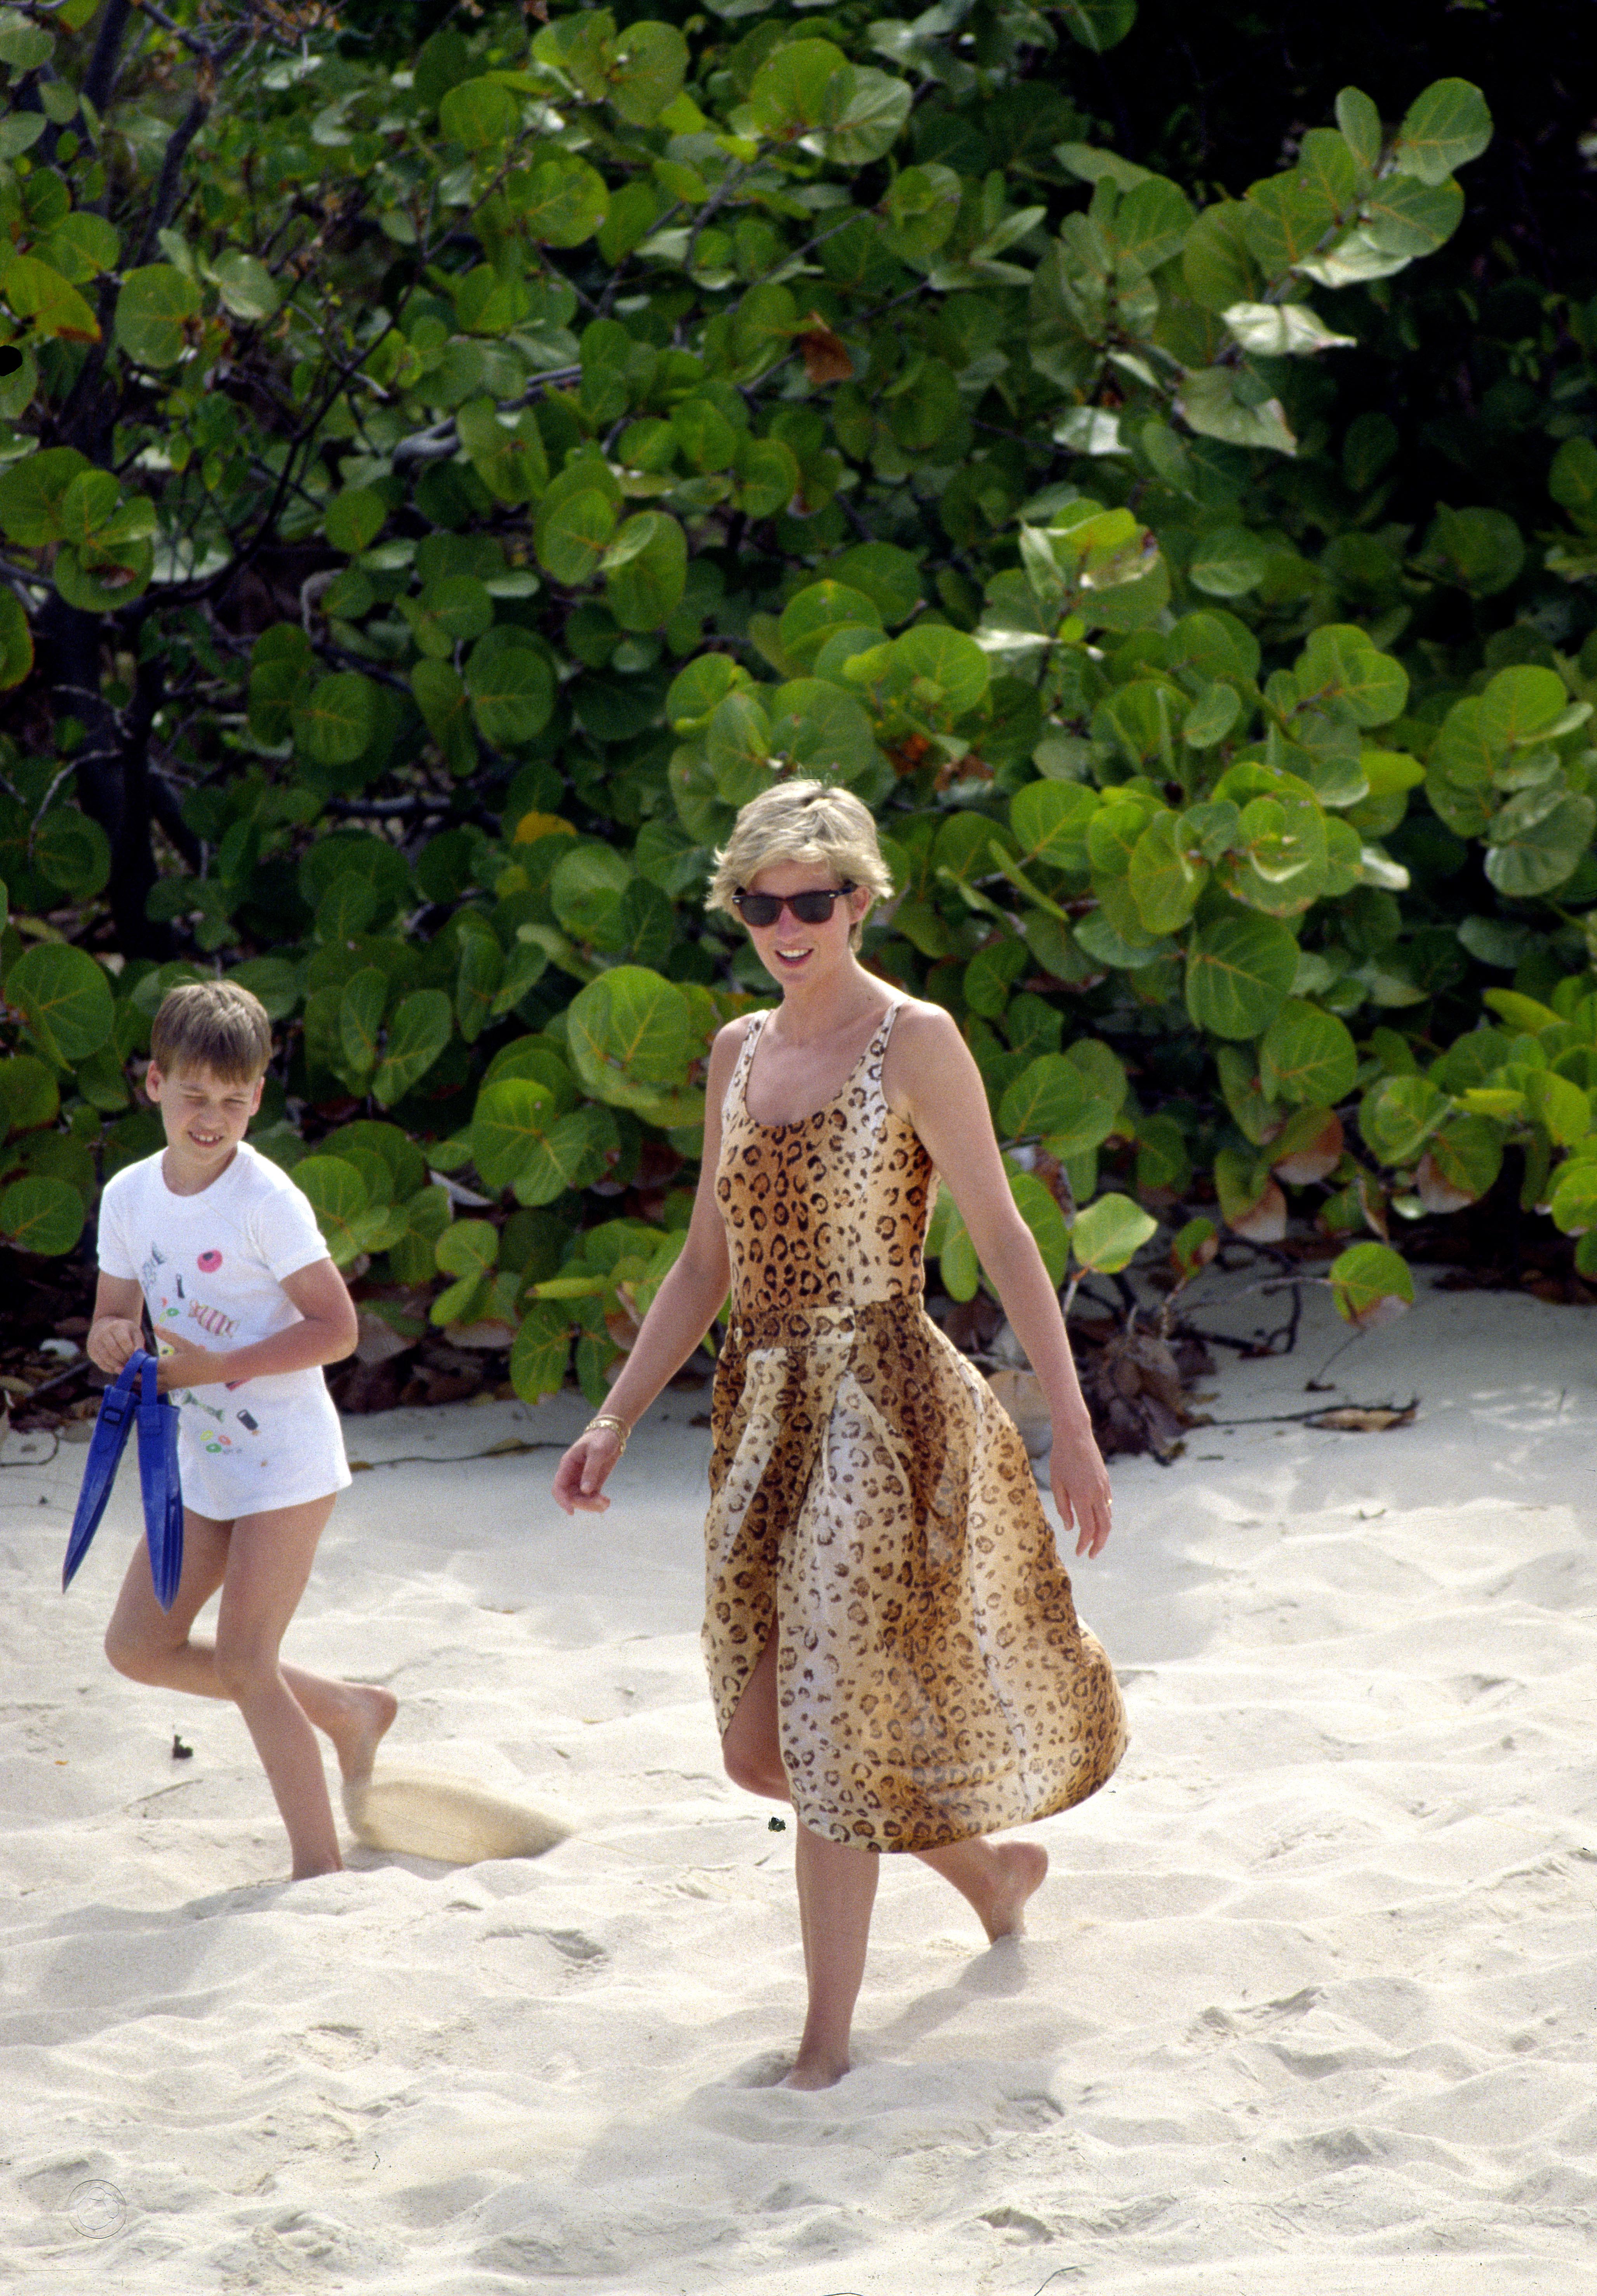 Diana, Princess of Wales with Prince William on April 11, 1990 in Necker Island | Source: Getty Images